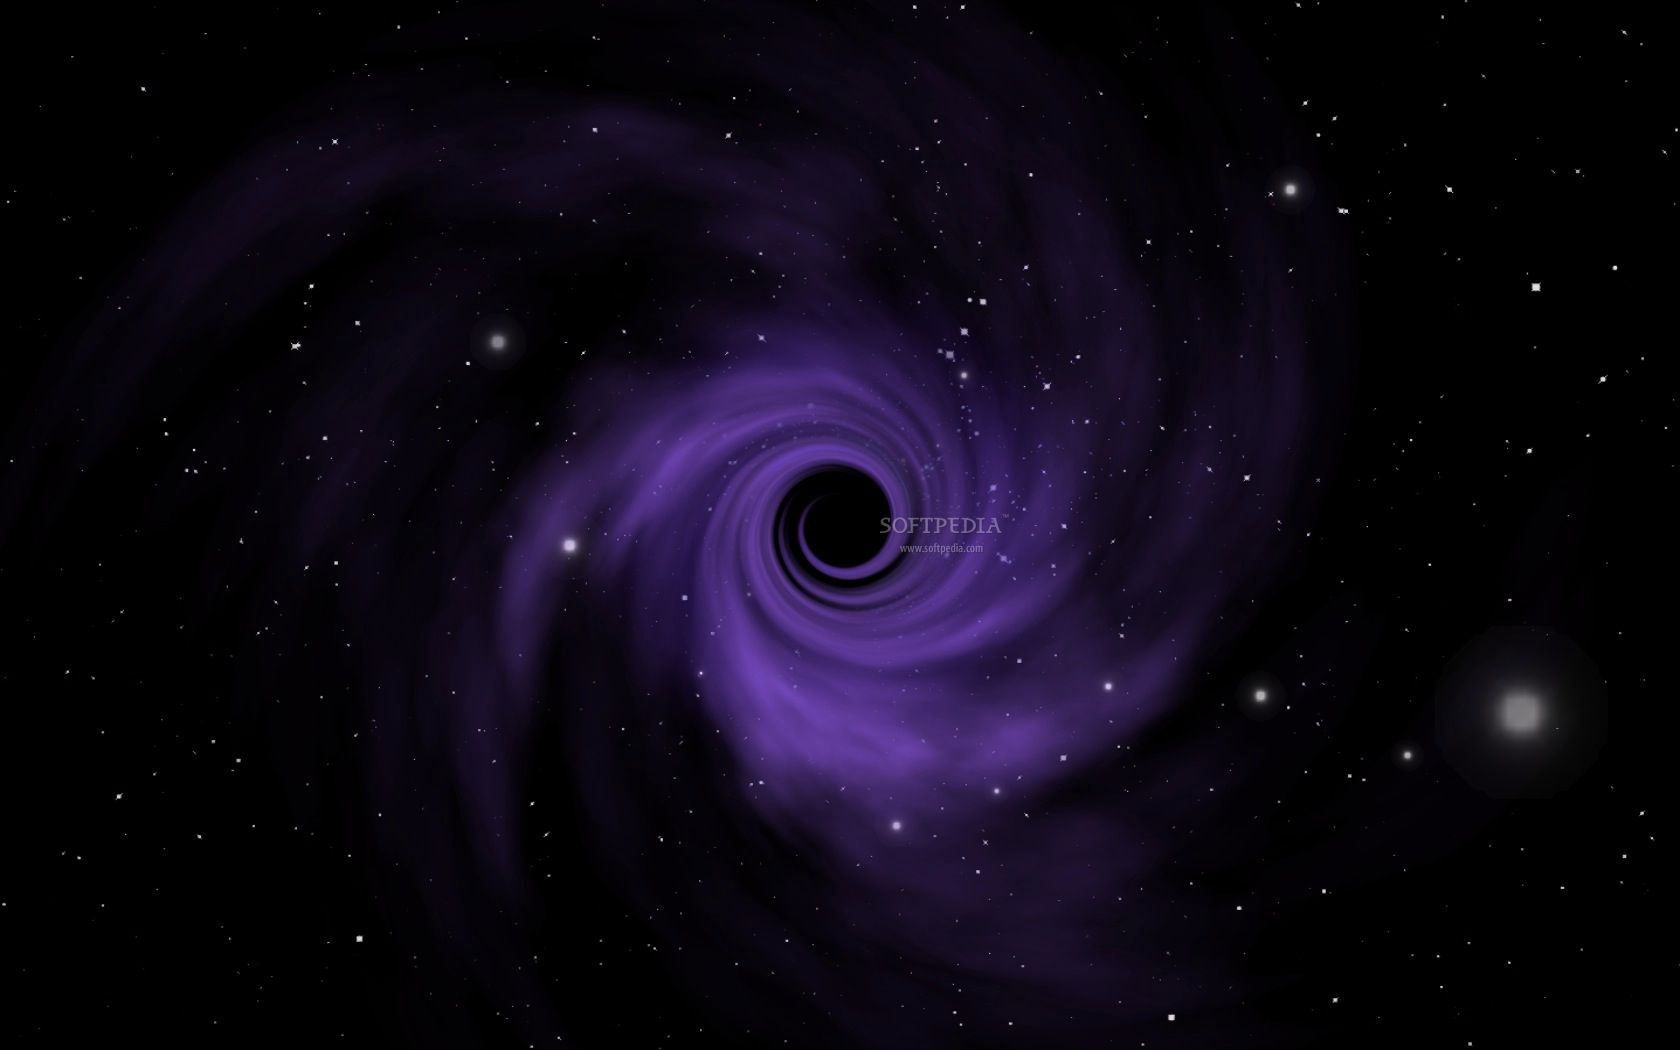 black hole. Black hole wallpaper, Black hole, Black holes in space